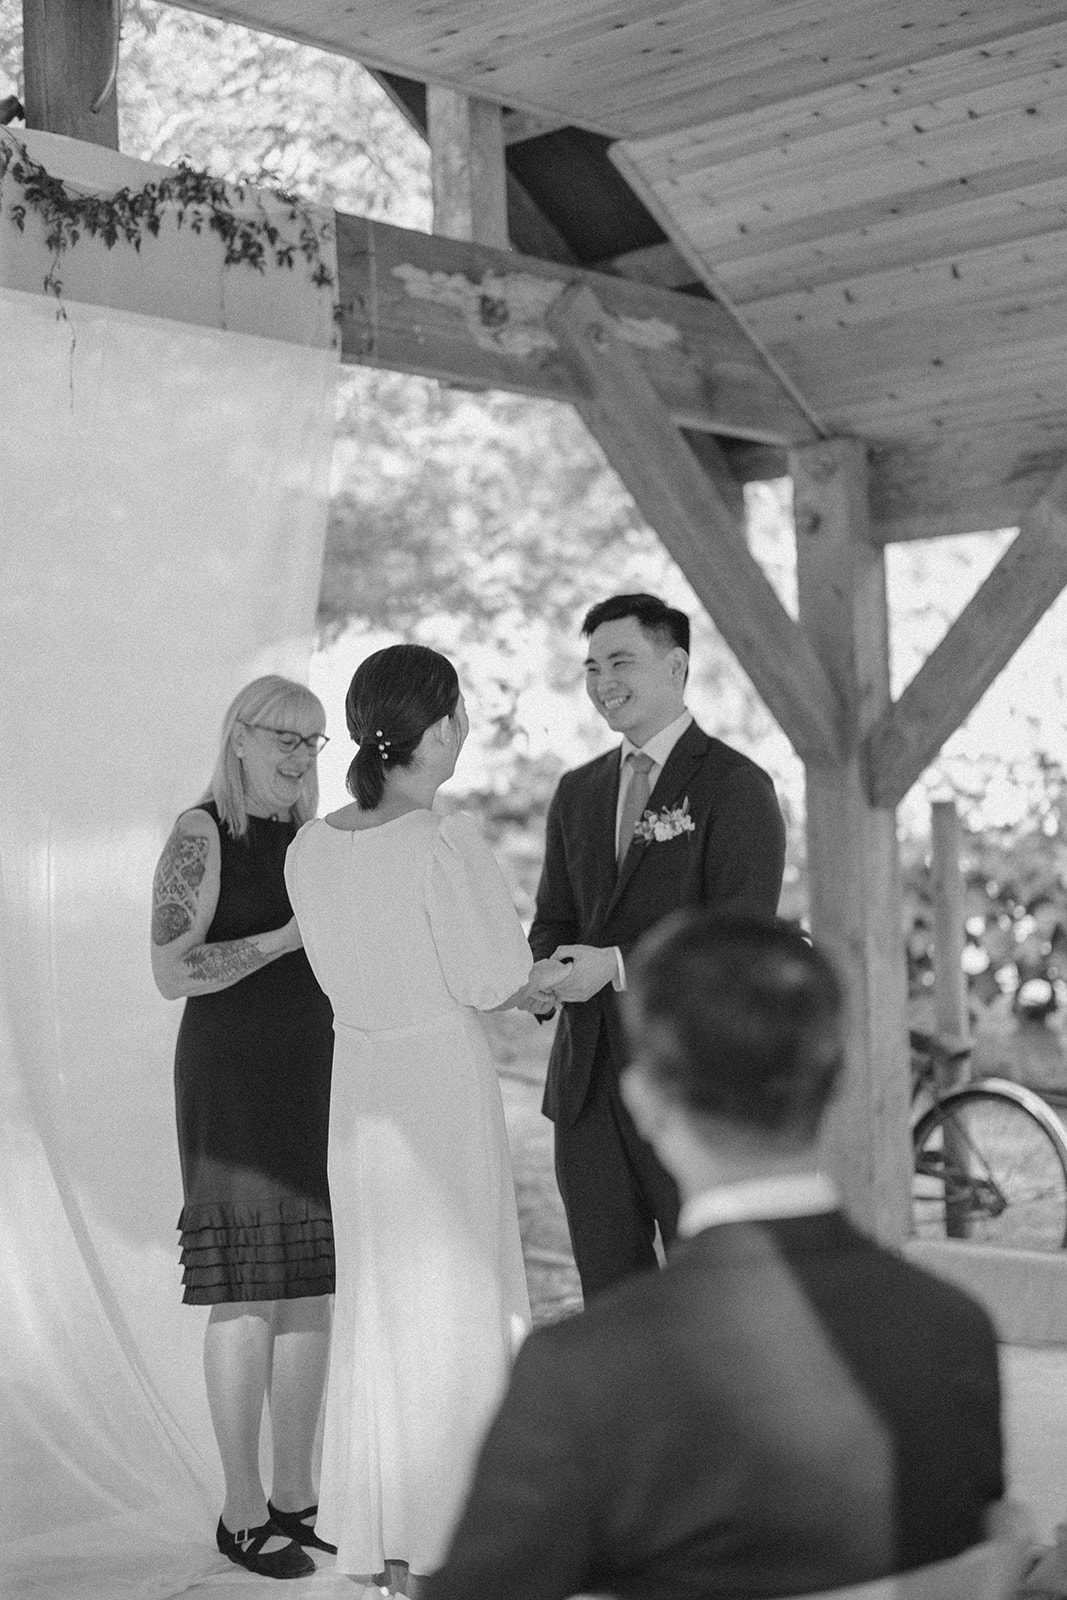 outdoor wedding reception, classic wedding style, wedding vows, black and white wedding photography